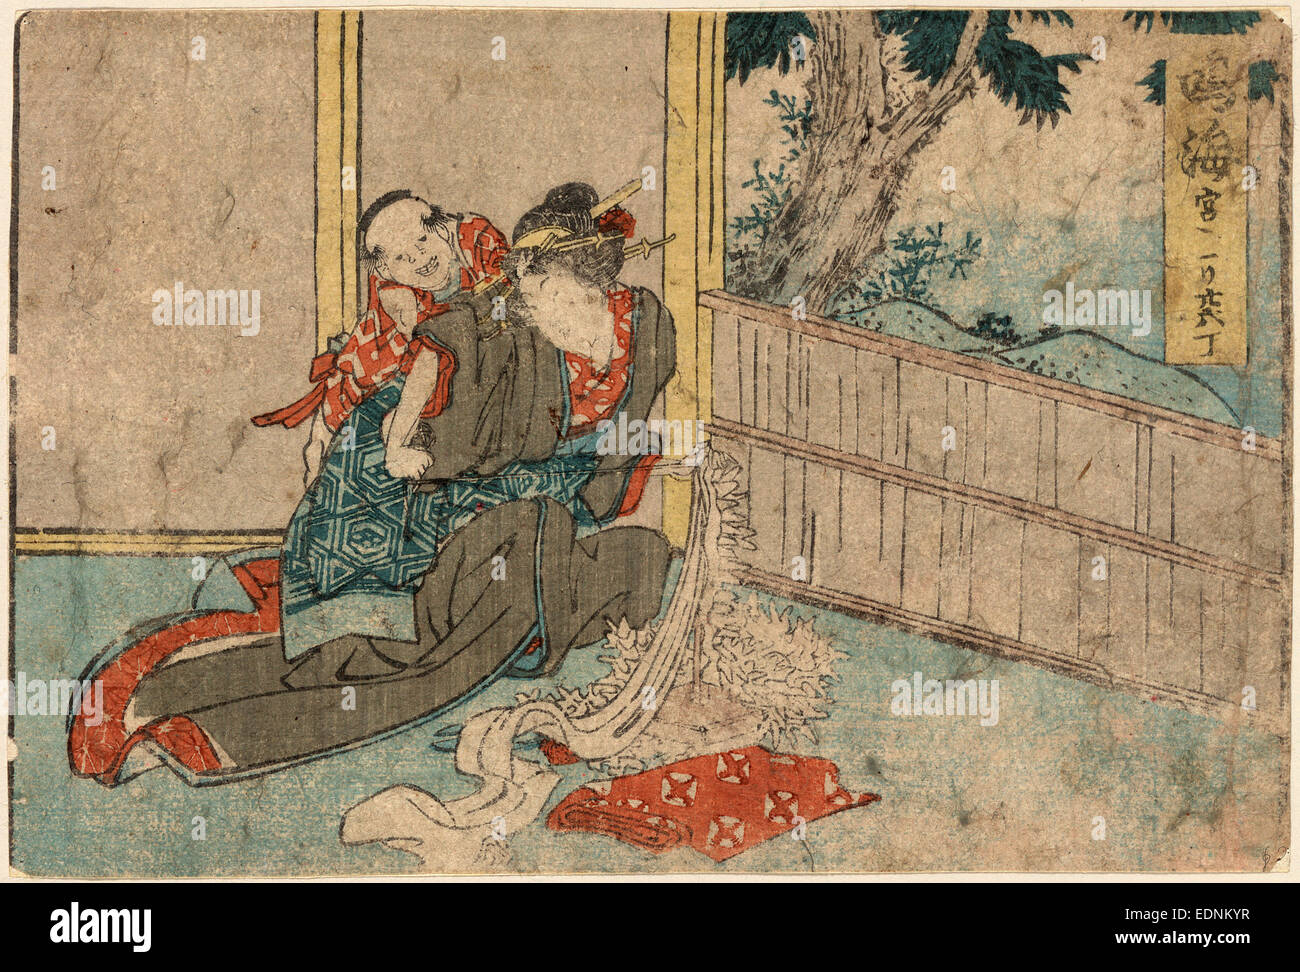 Narumi, Katsushika, Hokusai, 1760-1849, artist, 1804., 1 print : woodcut, color ; 11.2 x 16.6 cm., Print shows a woman working with fabric as a child tries to look over her shoulder. Stock Photo